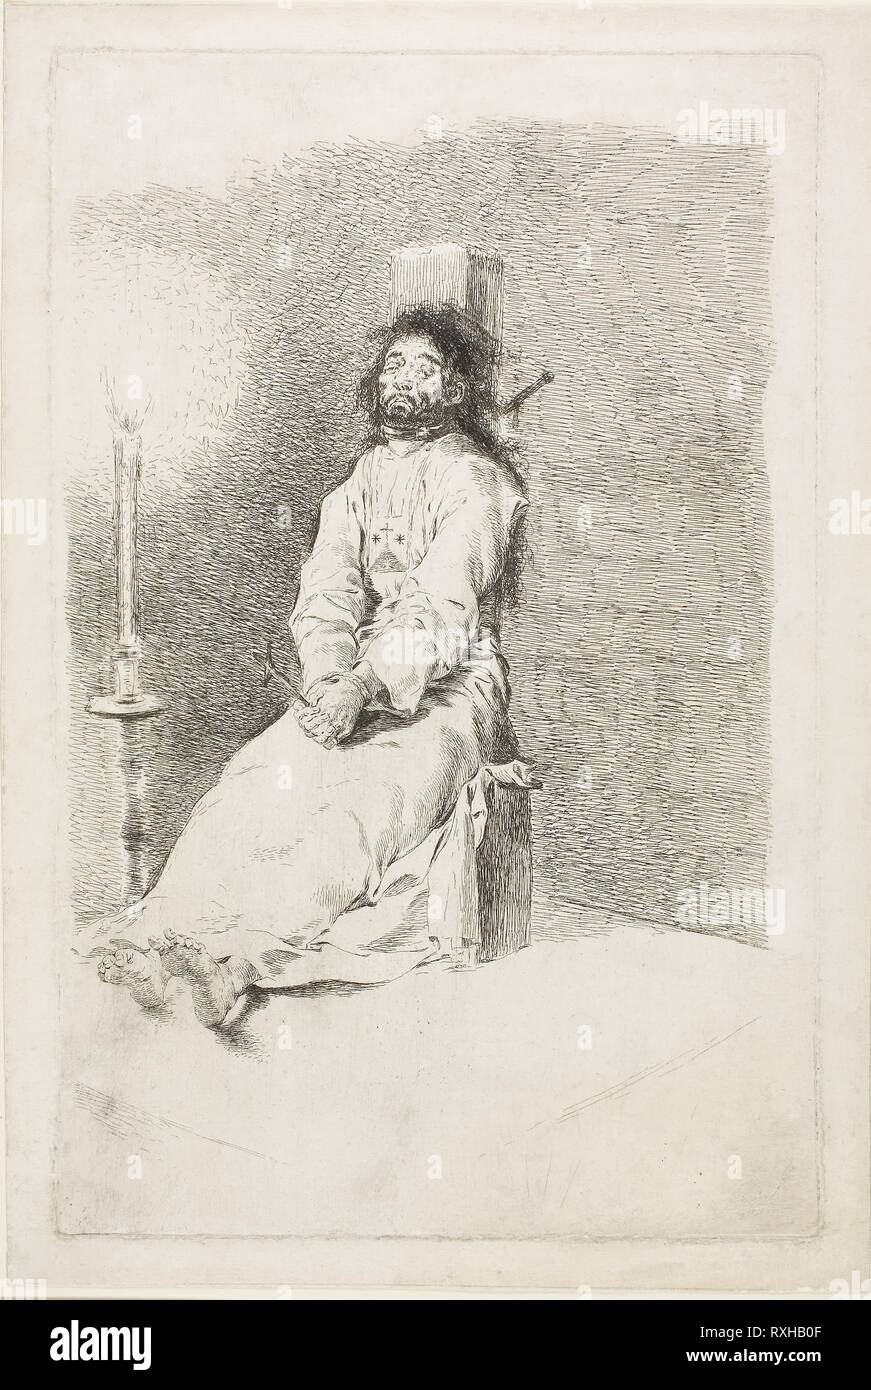 The Garrotted Man. Francisco José de Goya y Lucientes; Spanish, 1746-1828. Date: 1778-1780. Dimensions: 327 x 210 mm (plate); 353 x 240 mm (sheet). Etching on wove paper. Origin: Spain. Museum: The Chicago Art Institute. Stock Photo